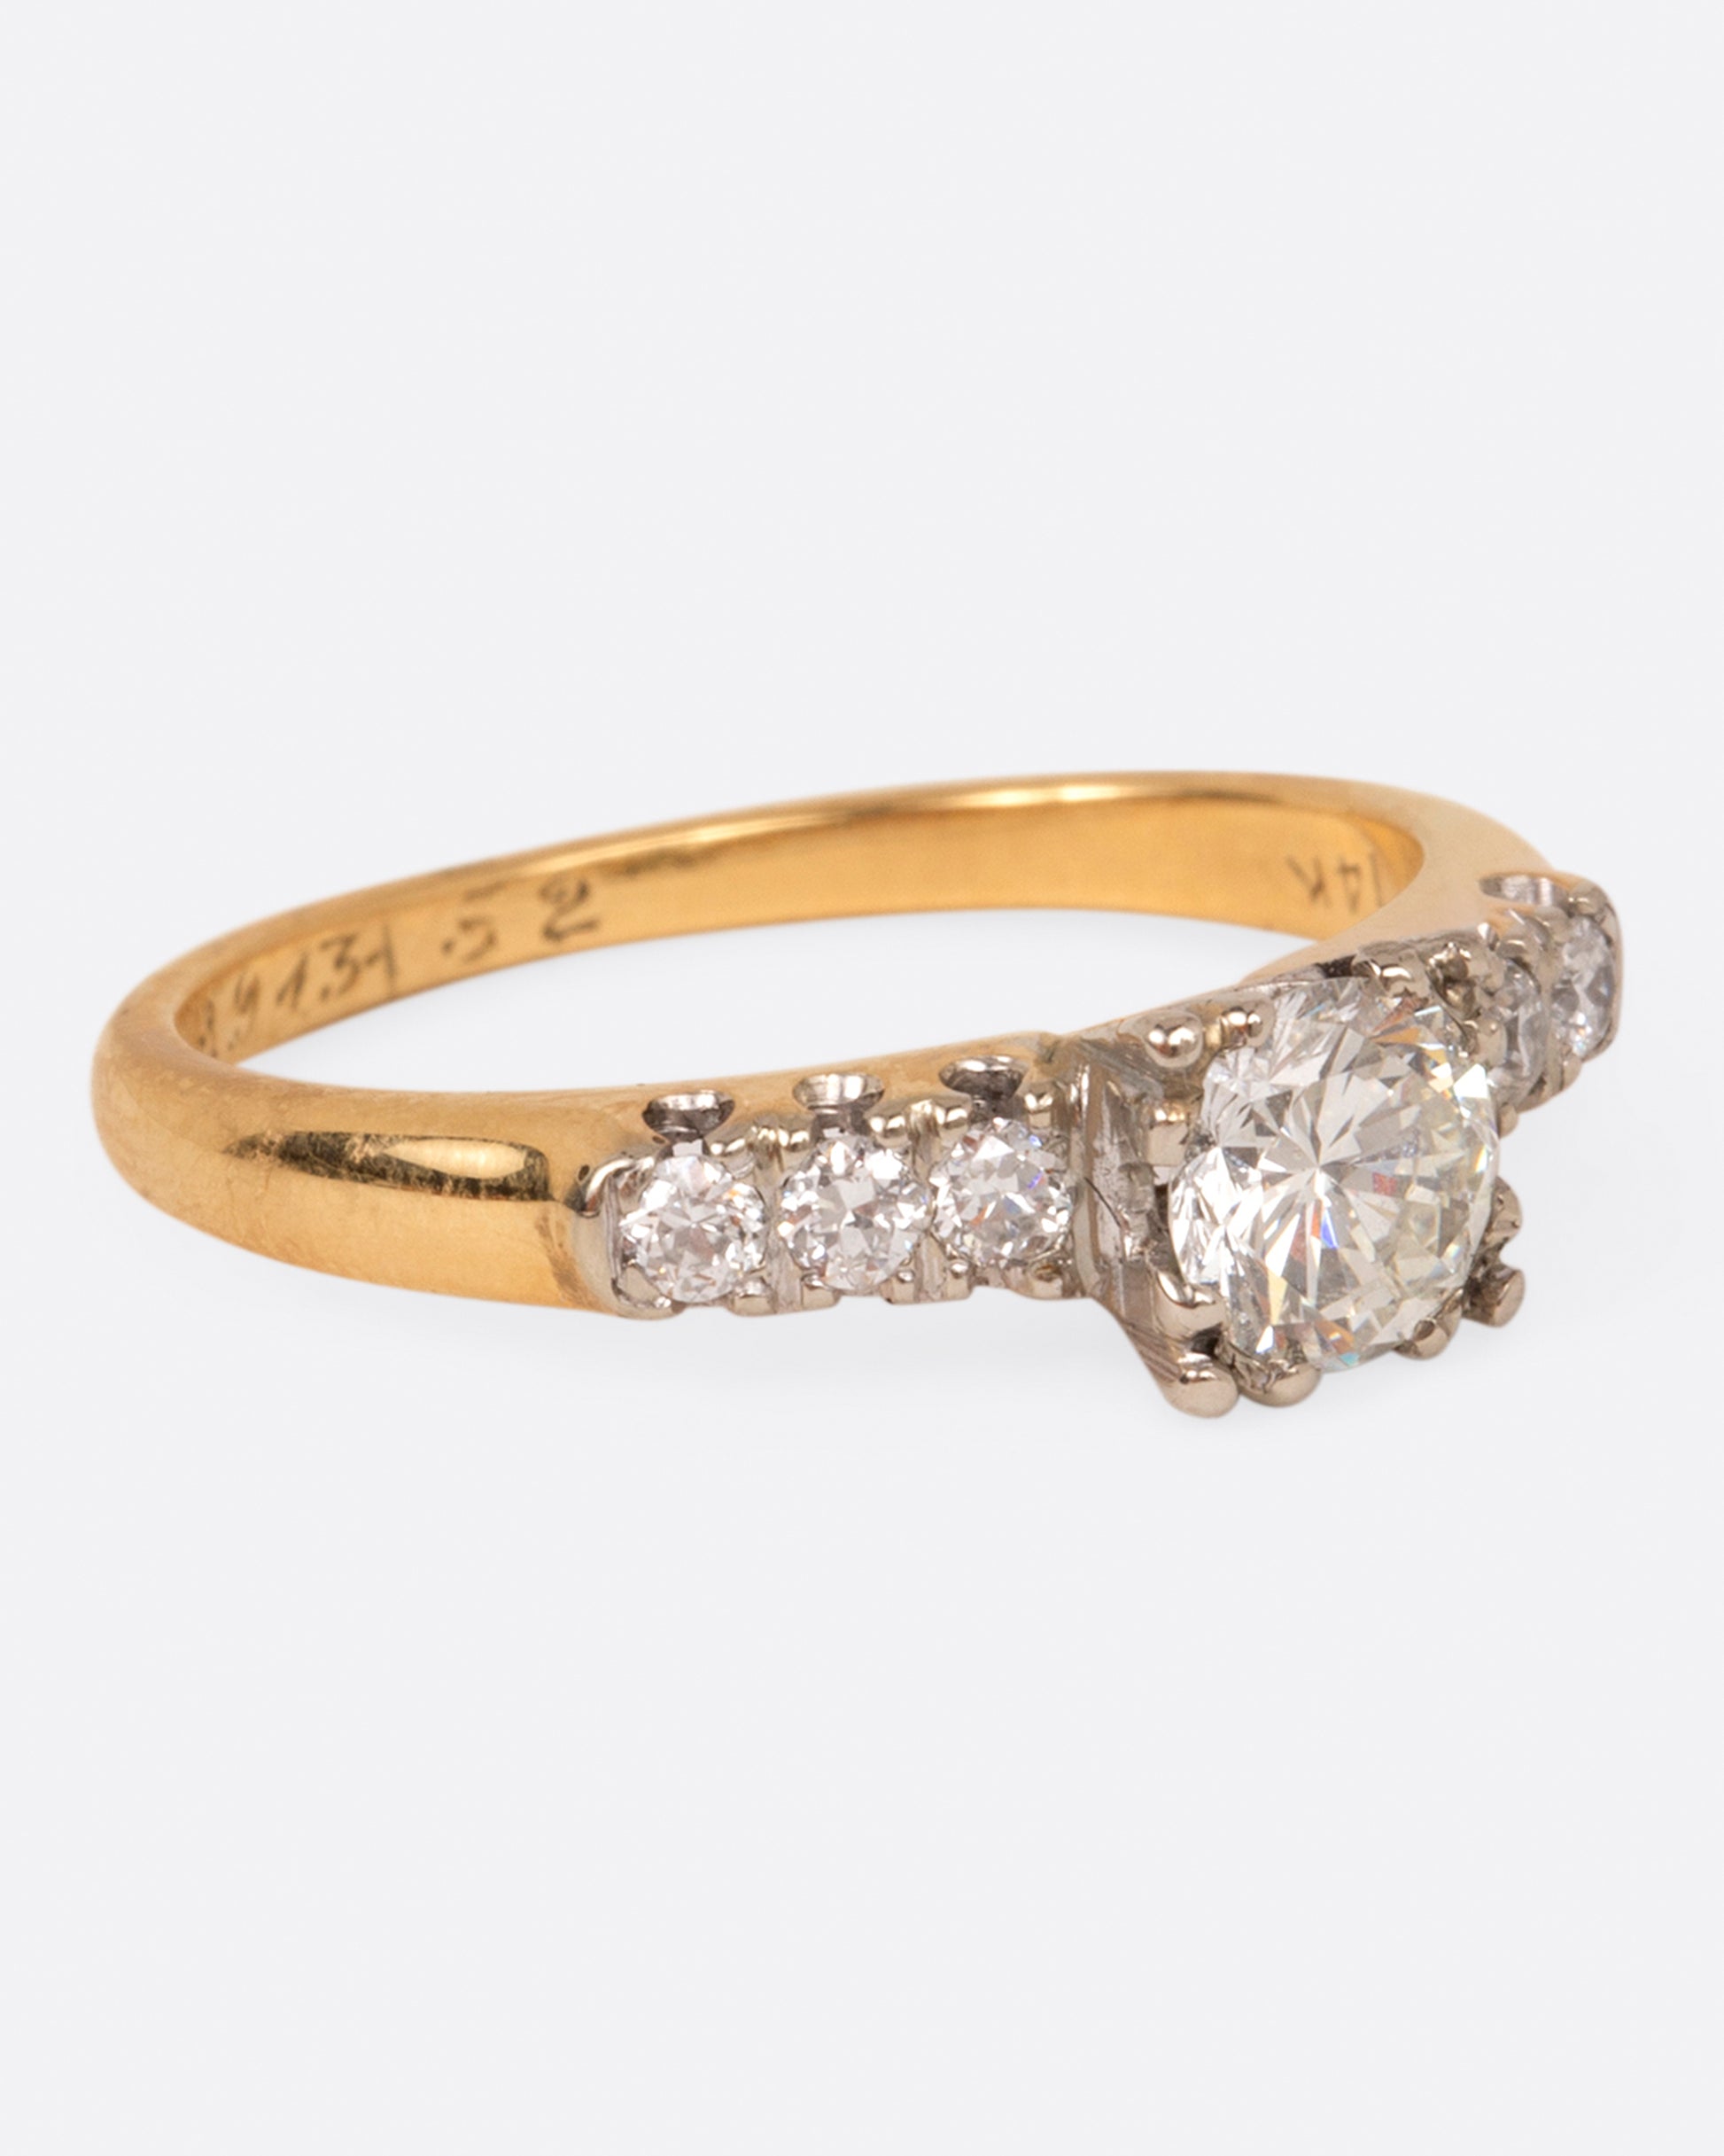 A yellow gold ring with a round center diamond and three smaller round diamonds on either side set in white gold prongs, shown from the side.